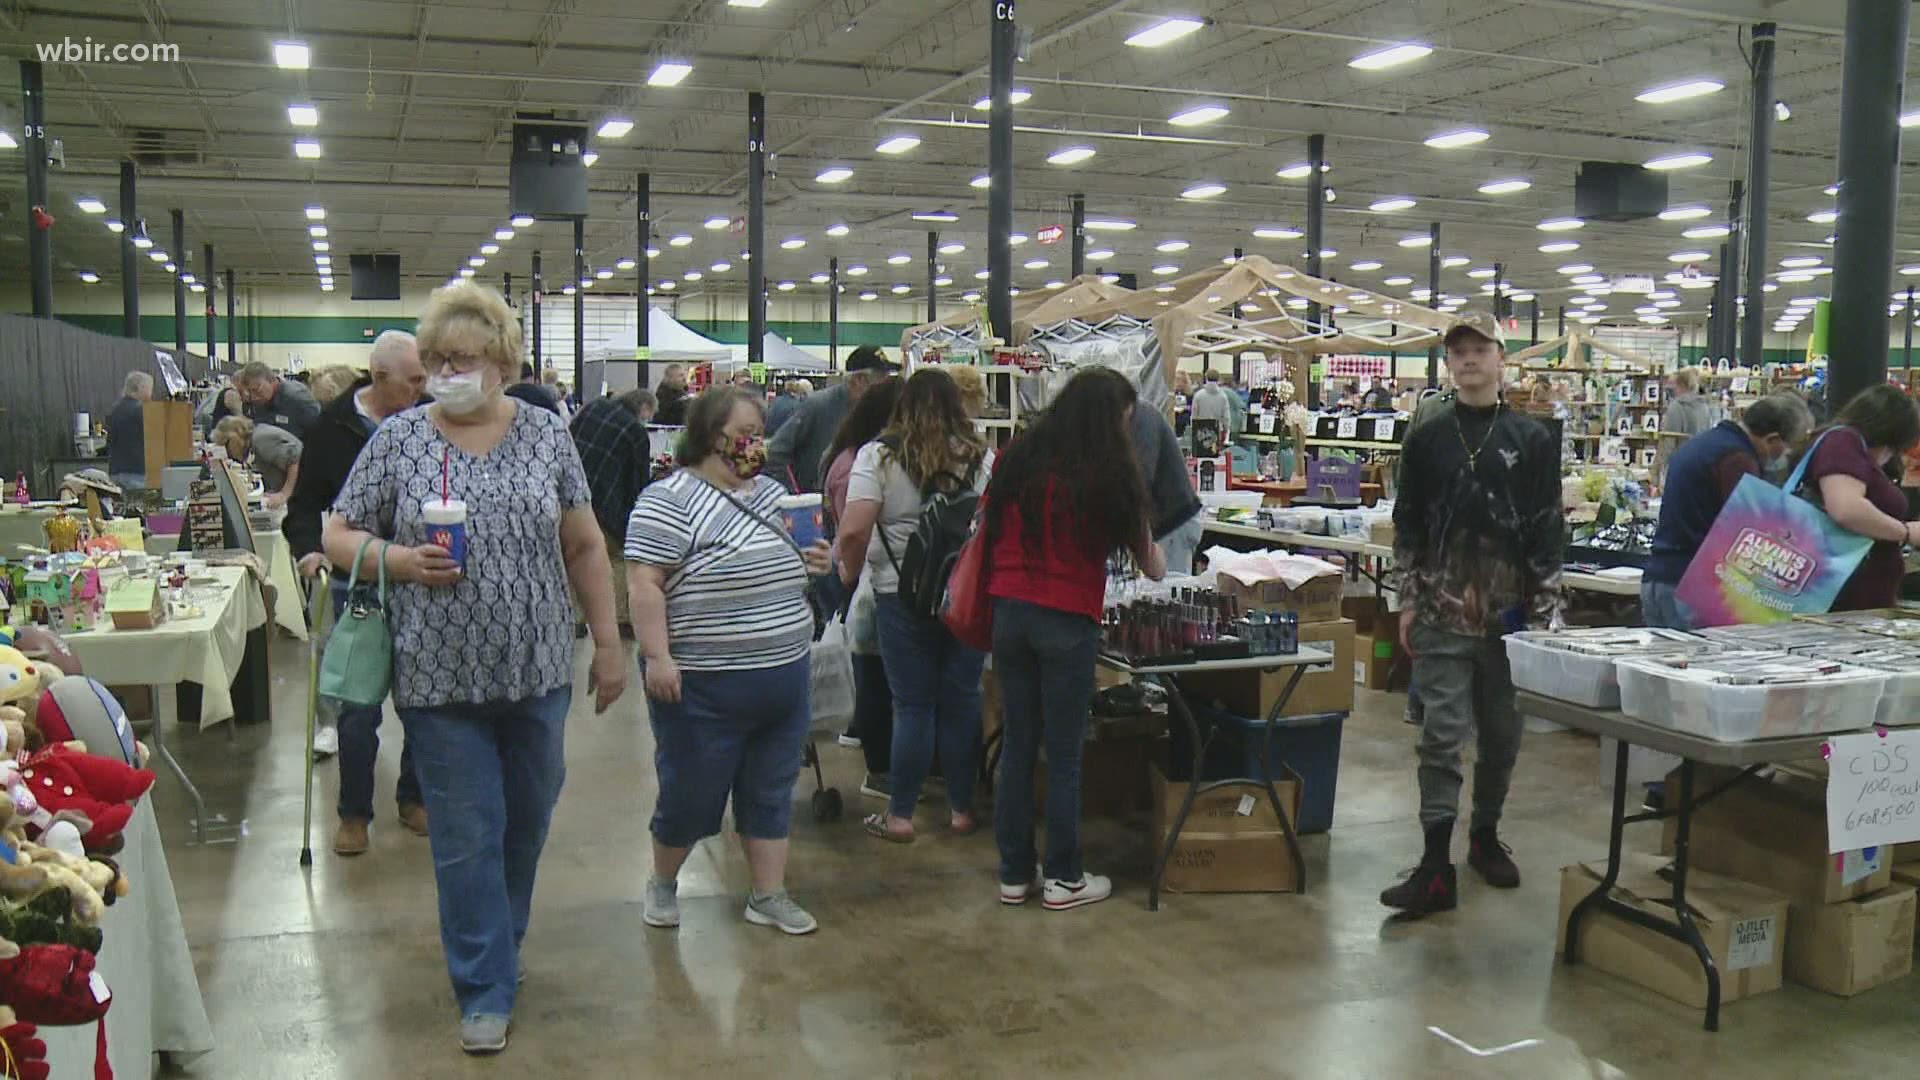 The Knoxville Flea Market made a comeback over the weekend after the previous event was canceled in February.